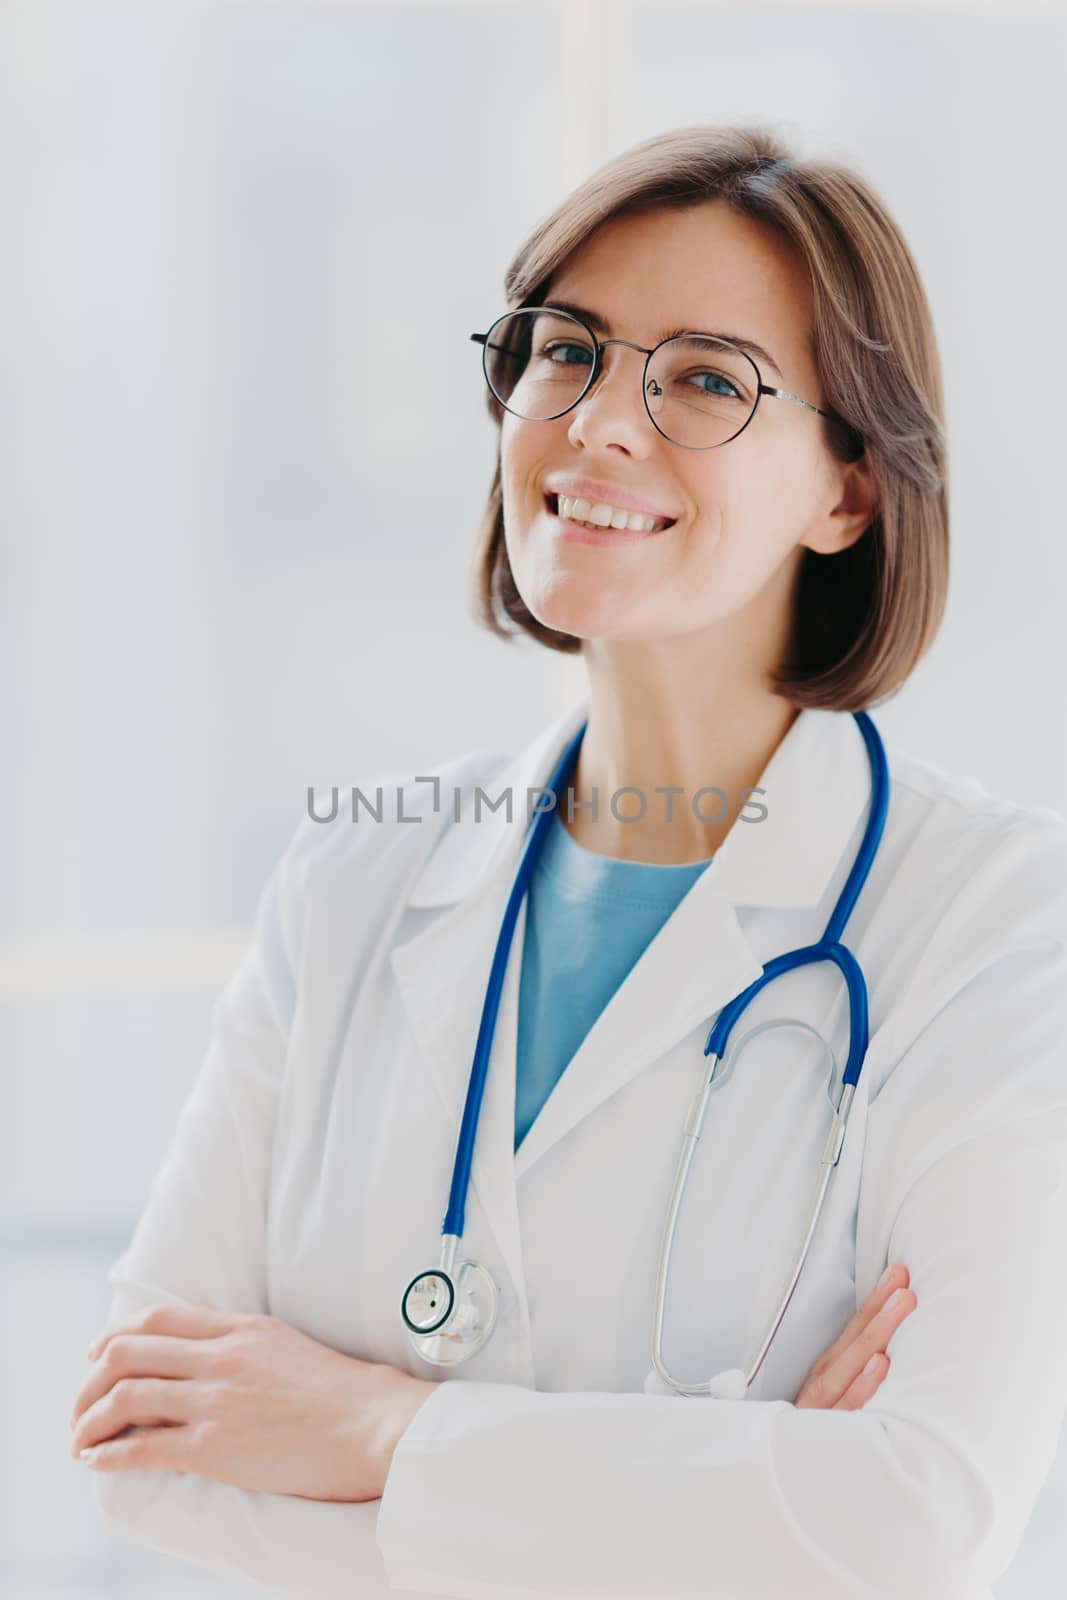 Close up portrait of short haired female general practitioner stands with smile and arms crossed, uses stethoscope, enjoys work, poses against white background. People, mediccare and treatment concept by vkstock